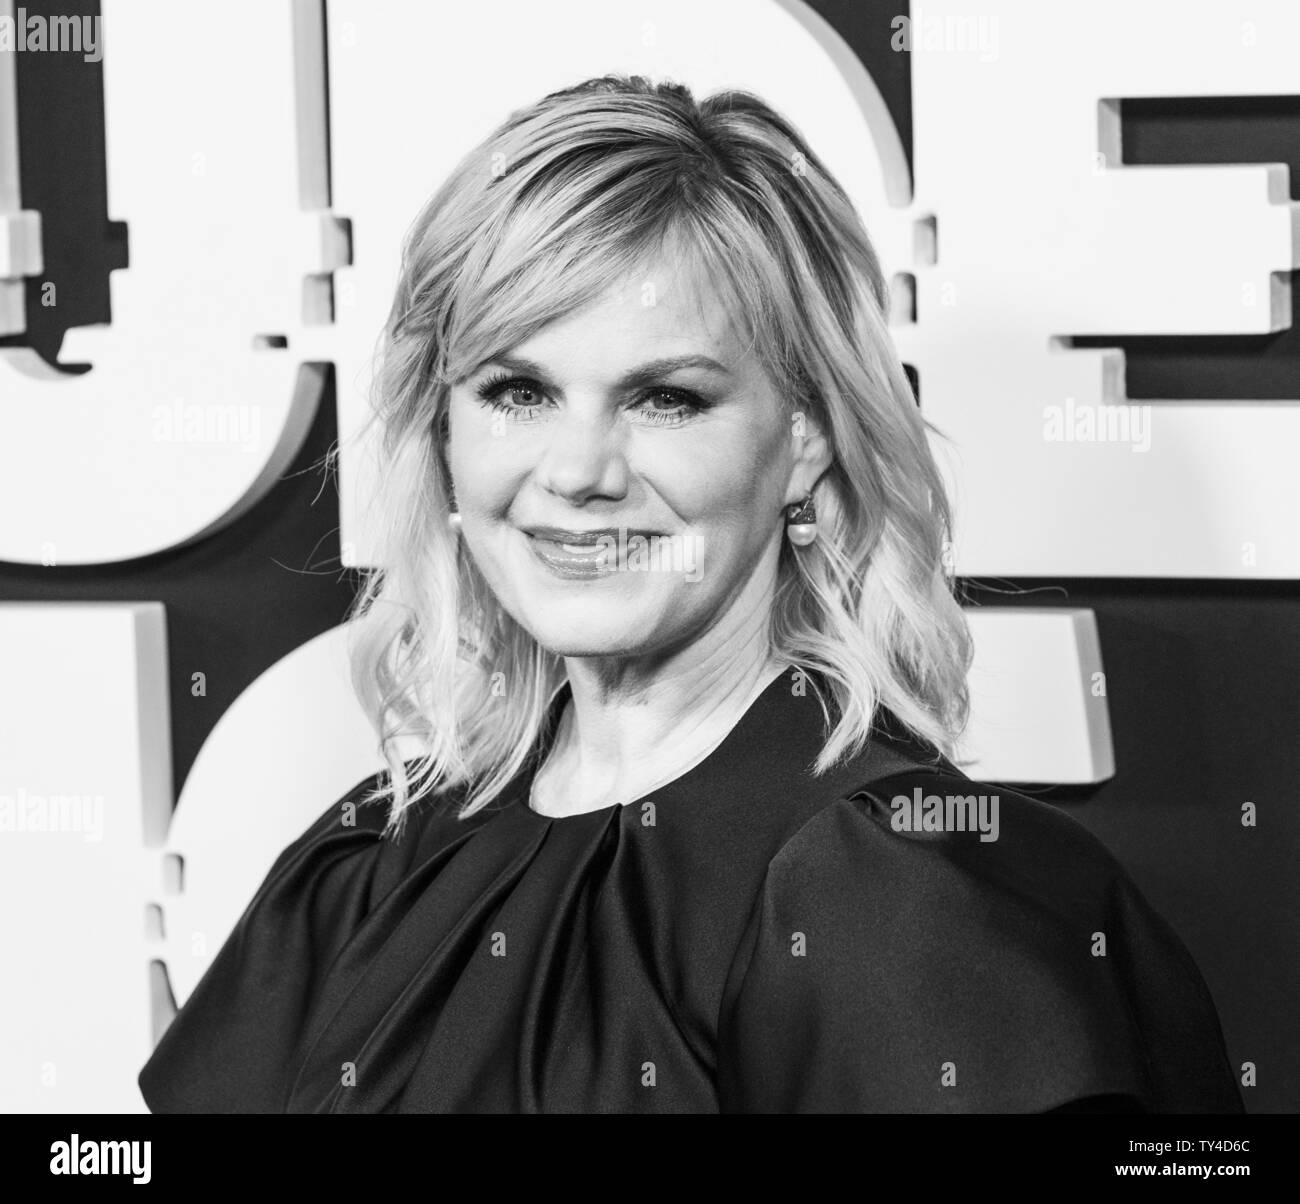 New York, NY - June 24, 2019: Gretchen Carlson attends Showtime network premiere of The Loudest Voice at Paris Theatre Stock Photo